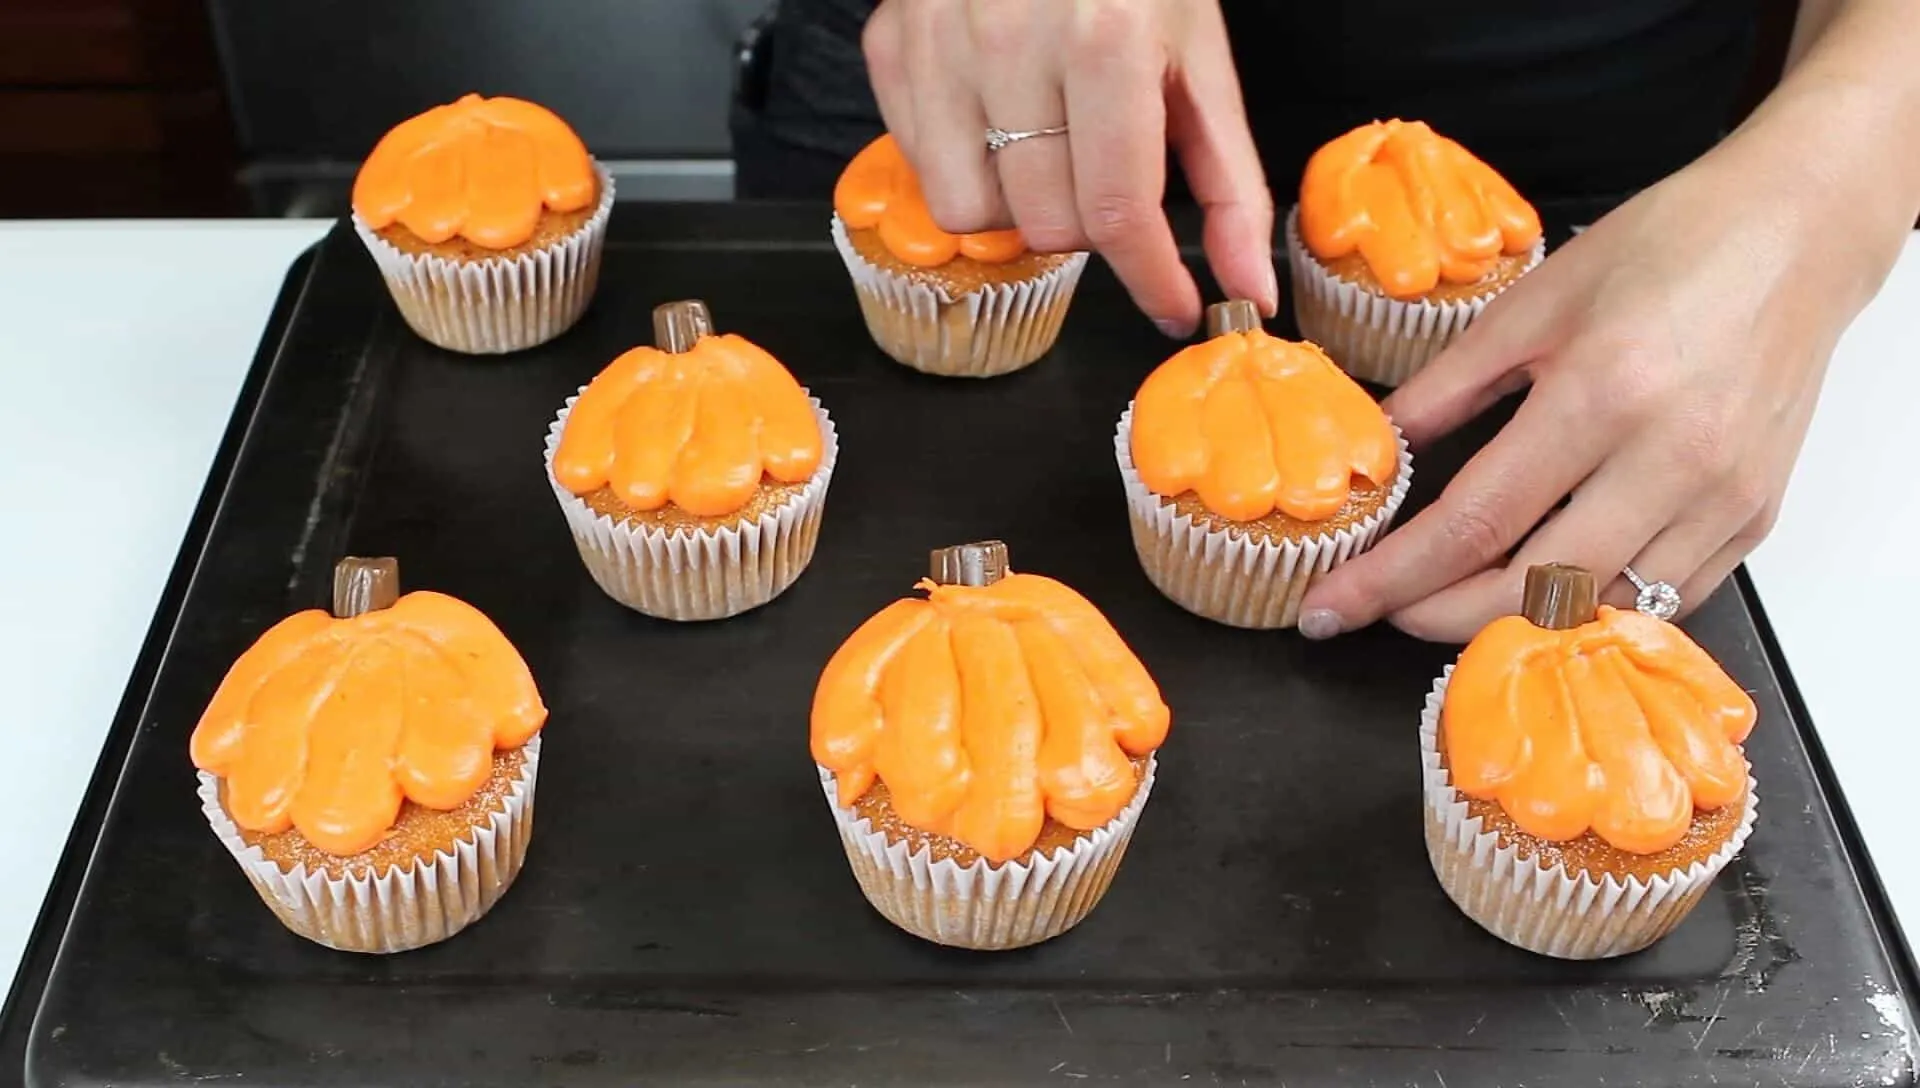  Image of adding tootsie roll stems to the pumpkin cupcakes